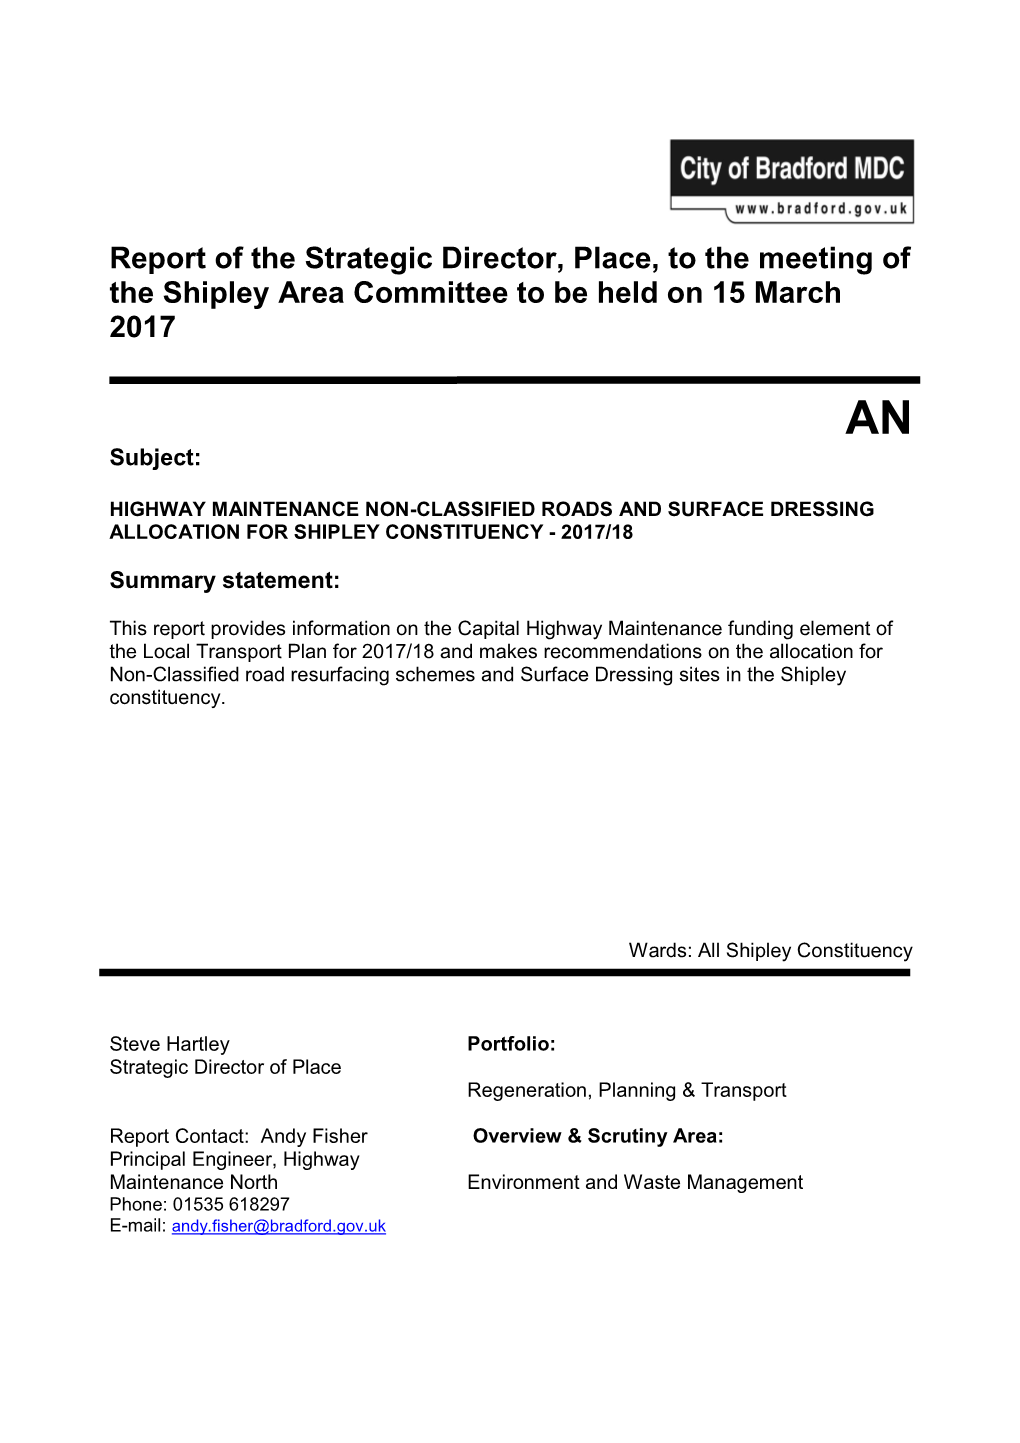 Report of the Strategic Director, Place, to the Meeting of the Shipley Area Committee to Be Held on 15 March 2017